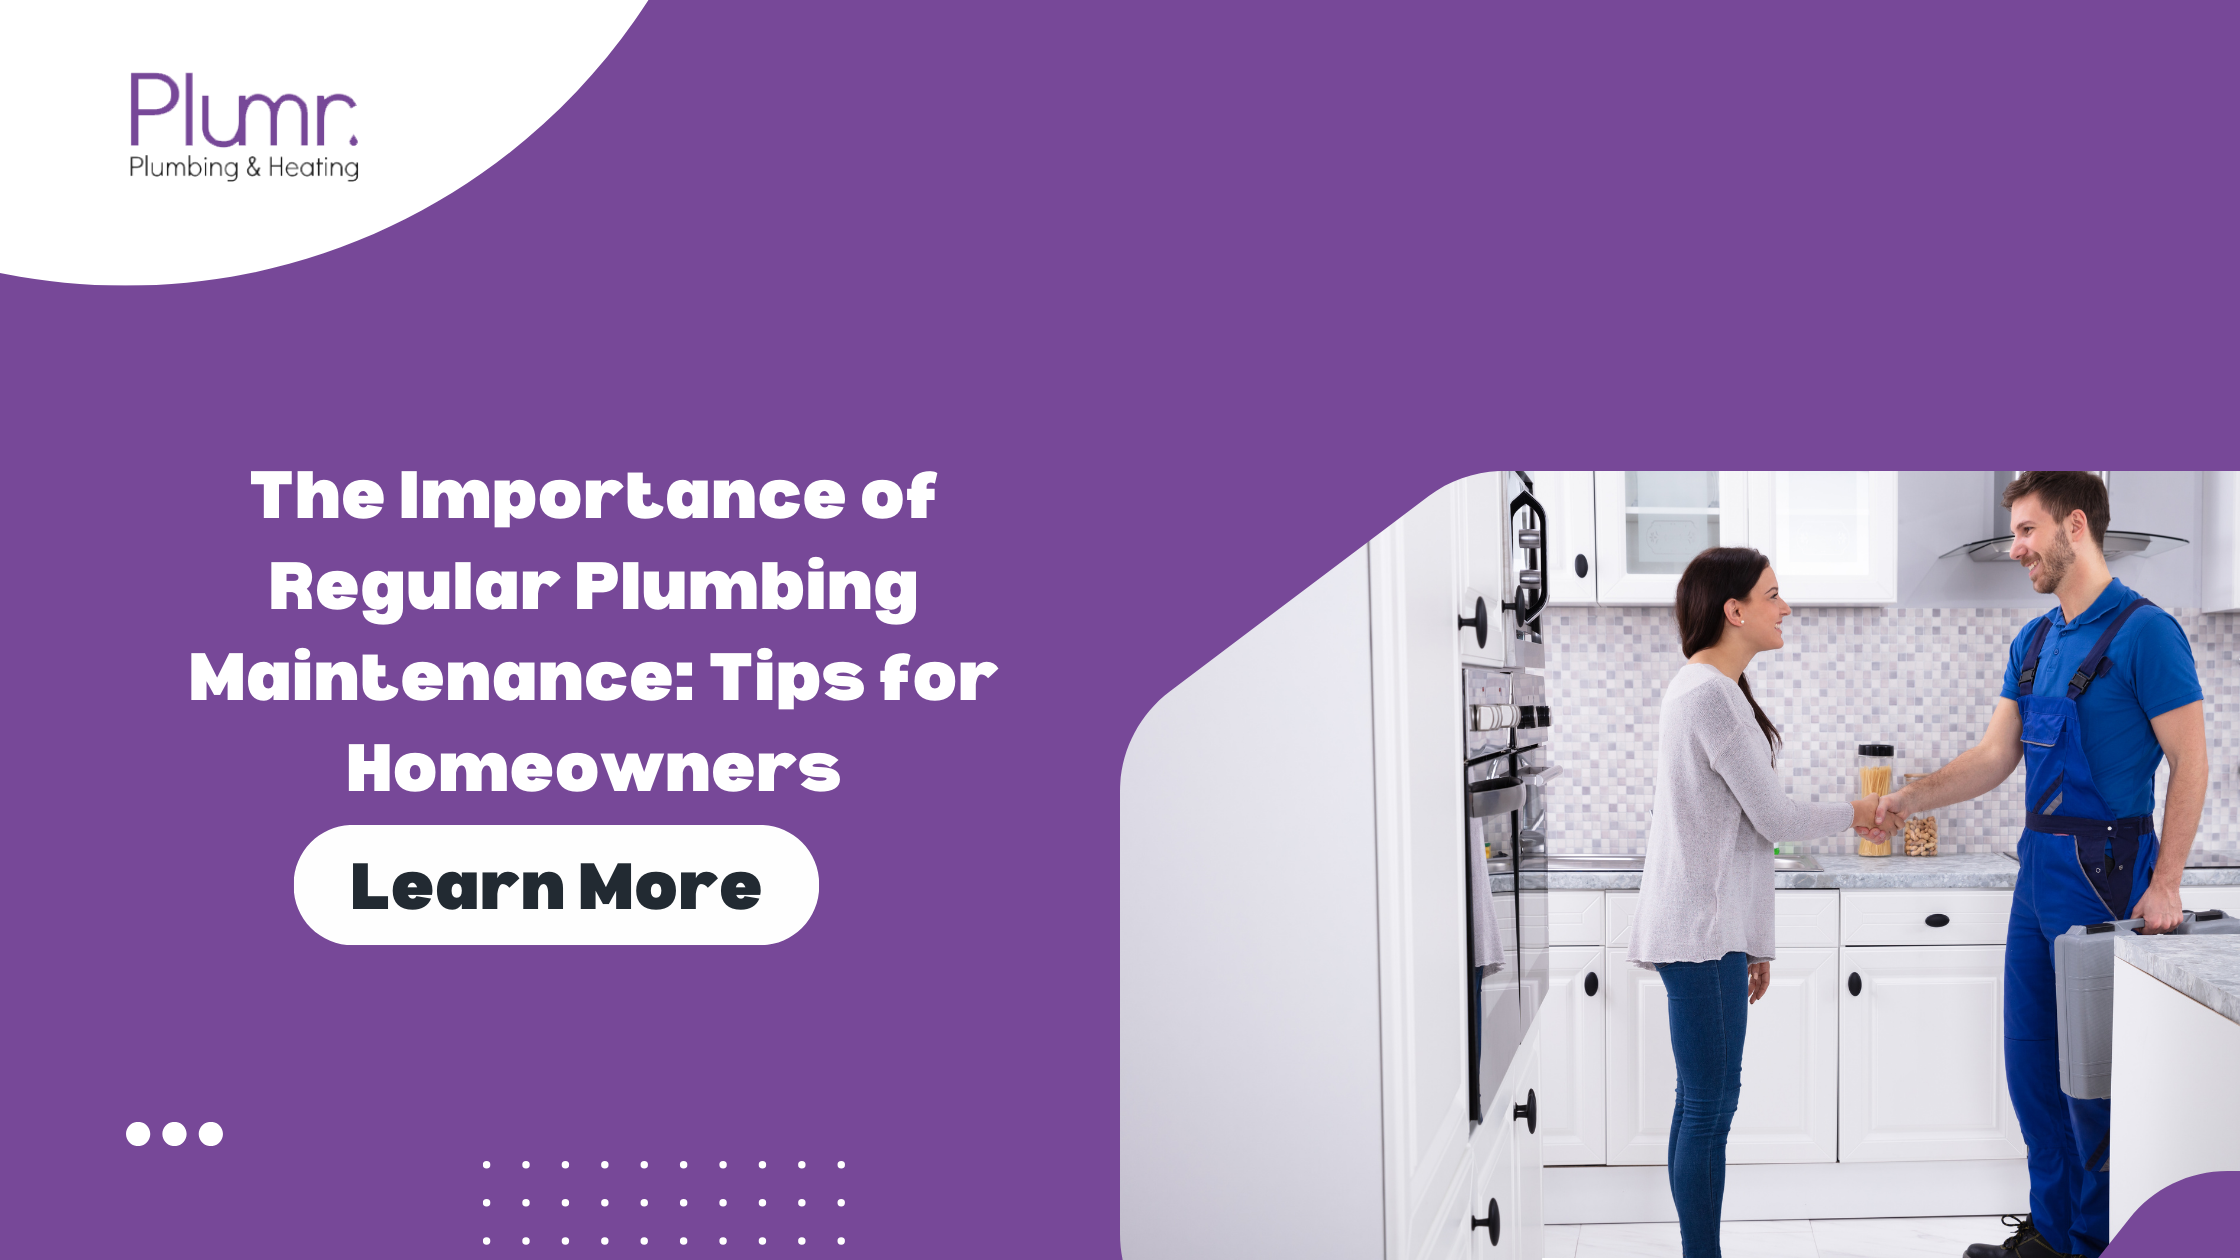 The Importance of Regular Plumbing Maintenance: Tips for Homeowners